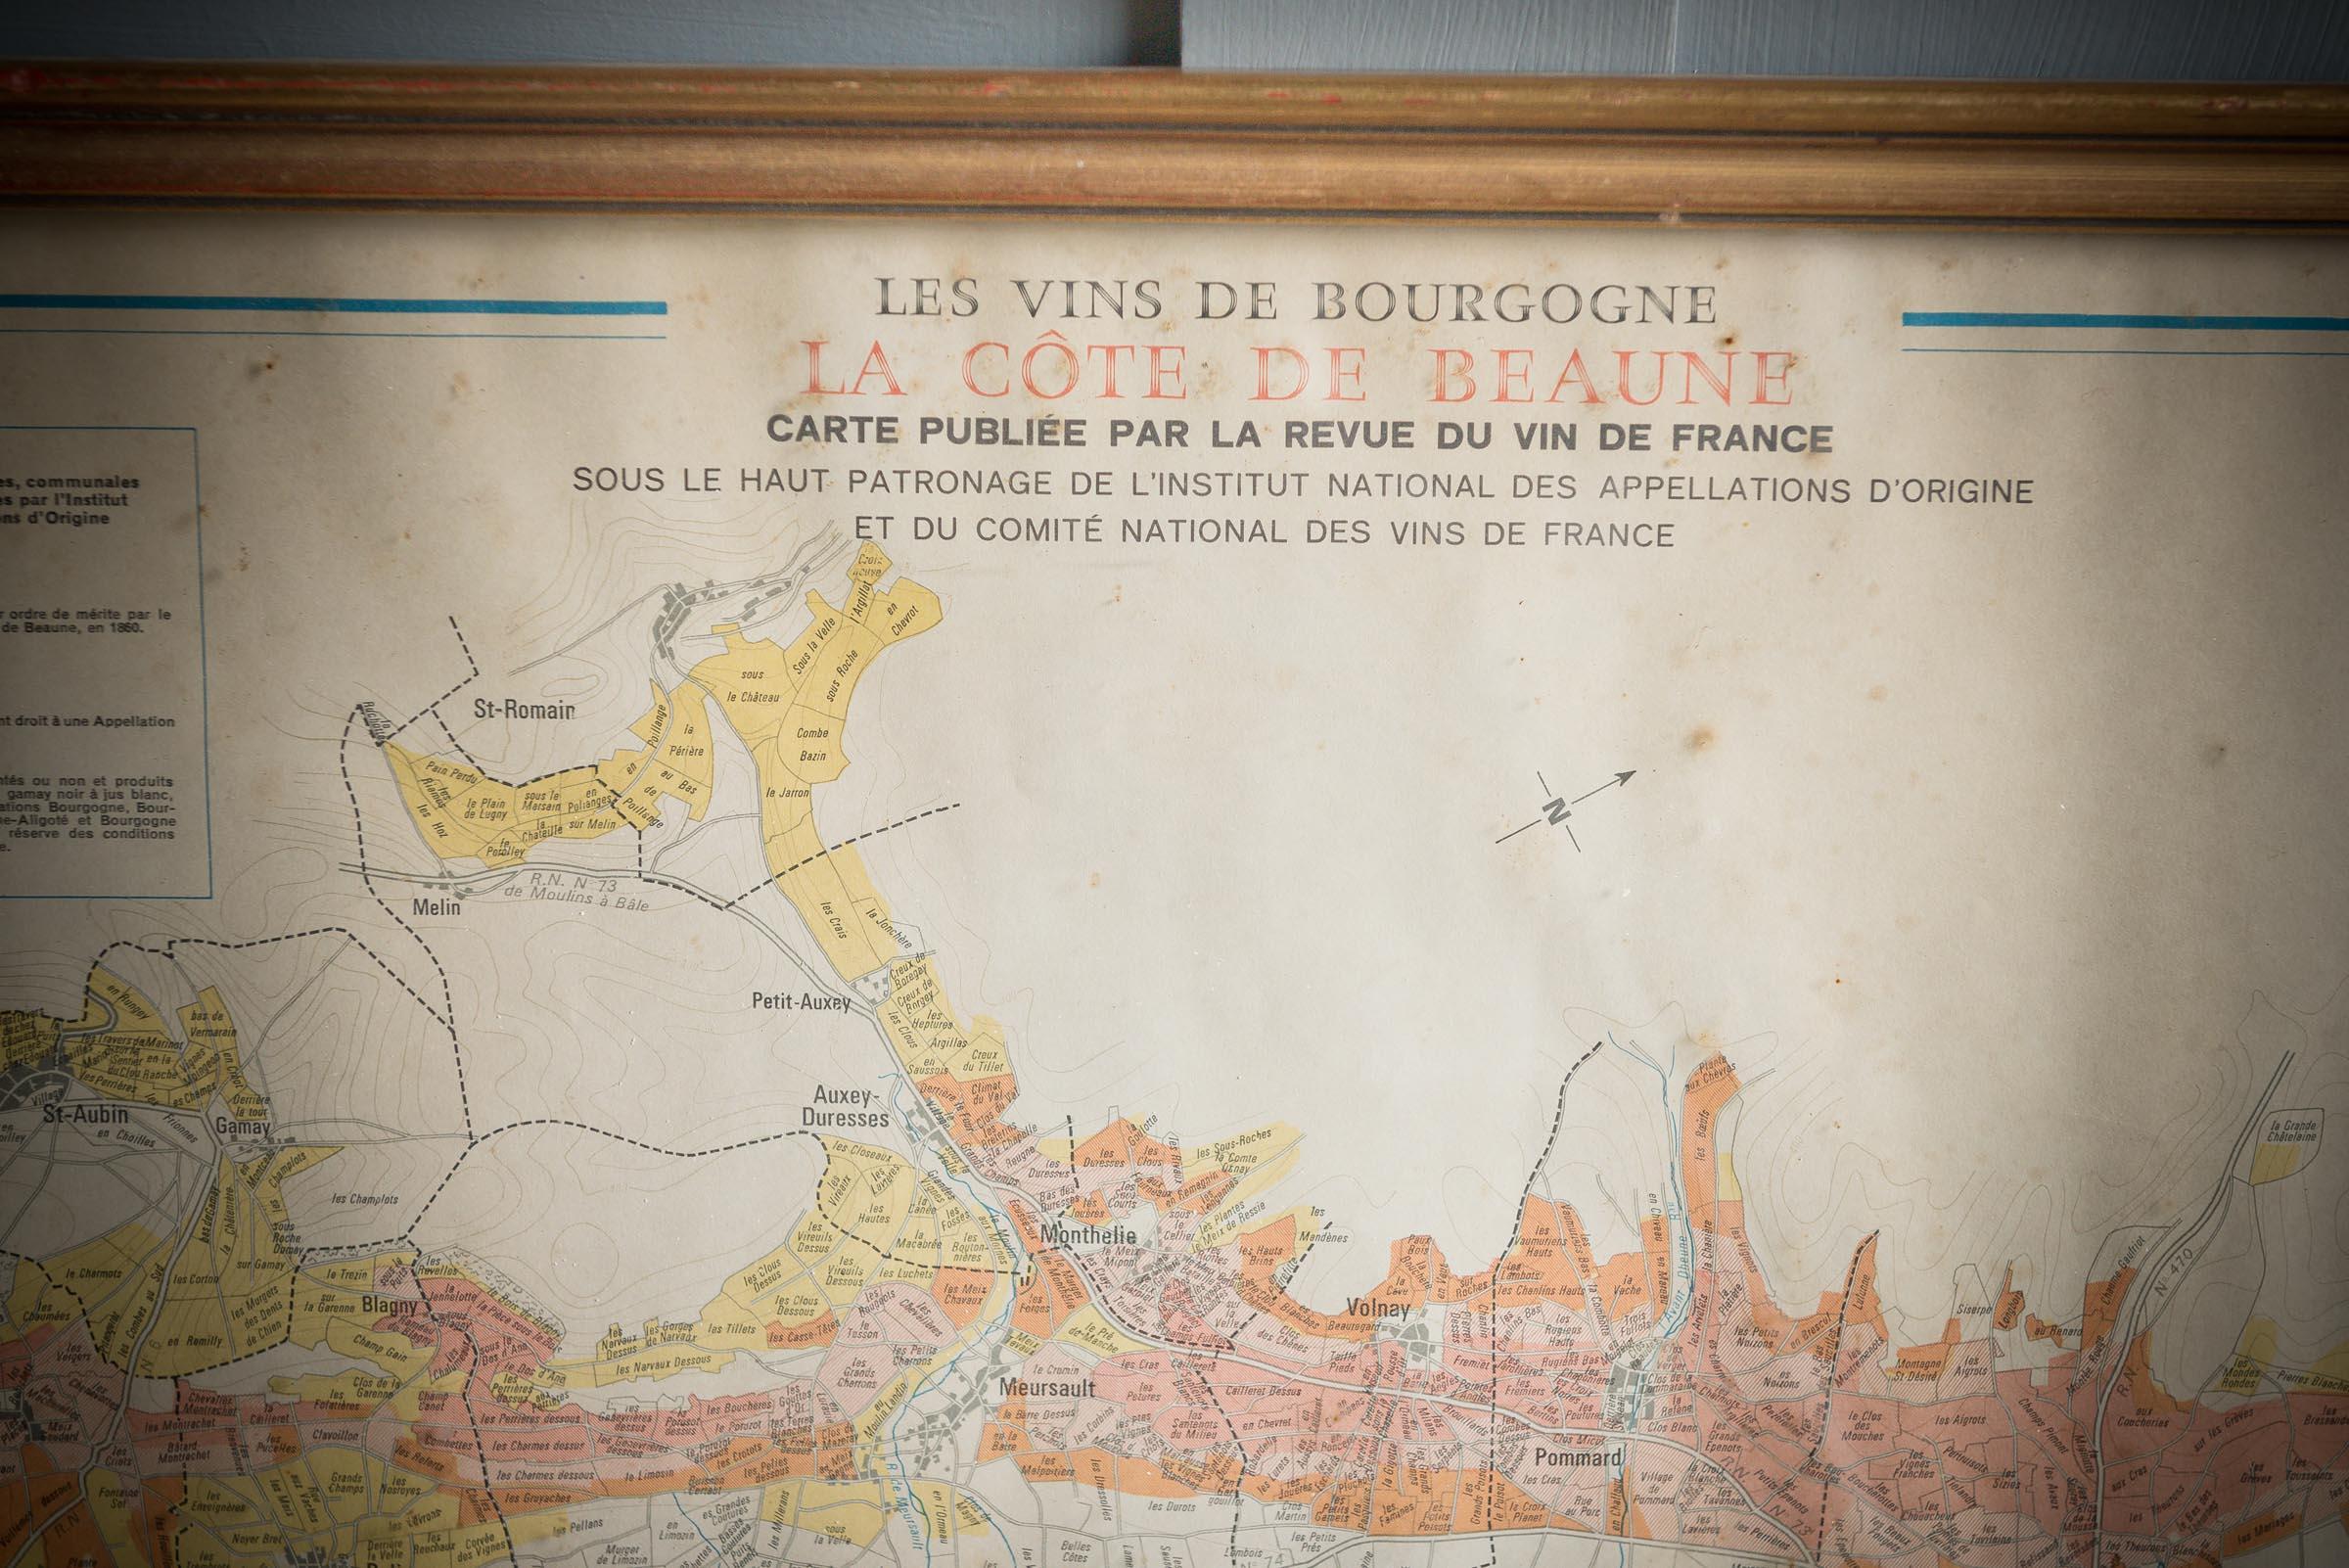 Framed Cote De Beaune region wine map from 1972. The print has been removed to clean the glass, the frame has minor damage in places but nothing that detracts from its beauty, if anything this 'wear and tear' only adds to the provenance and